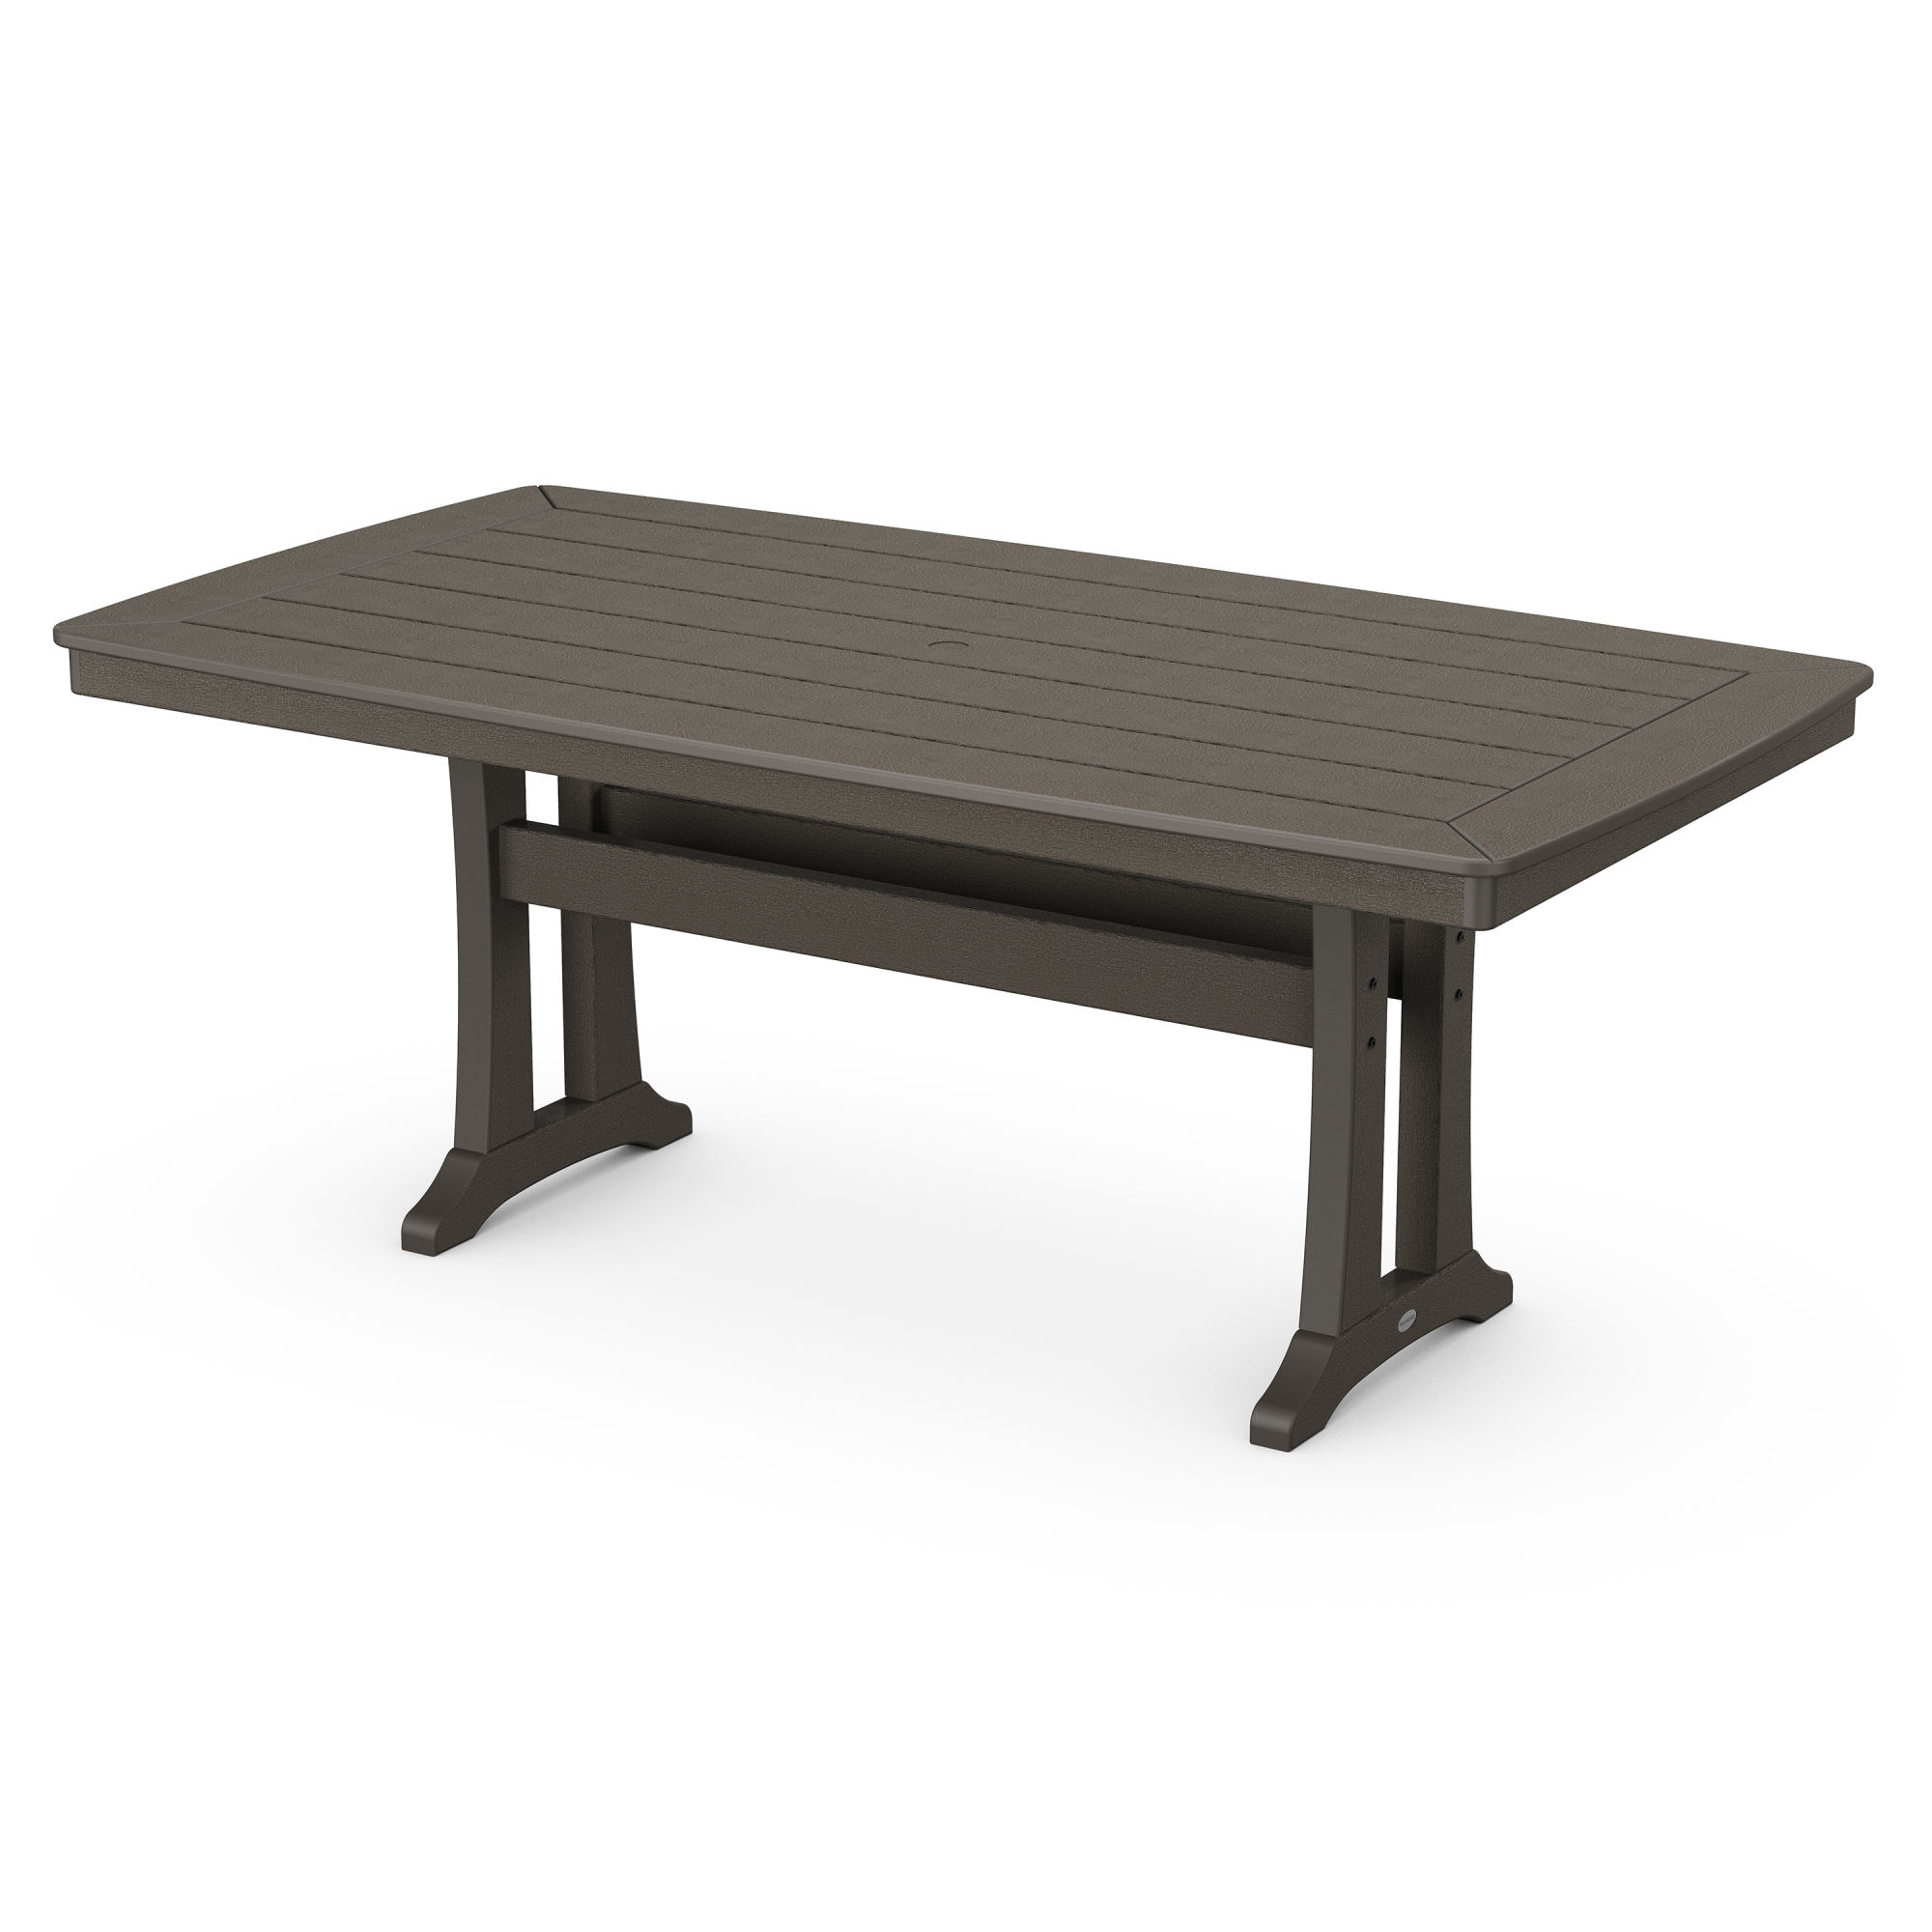 POLYWOOD® Nautical Trestle 38" x 73" Dining Table in Vintage Finish